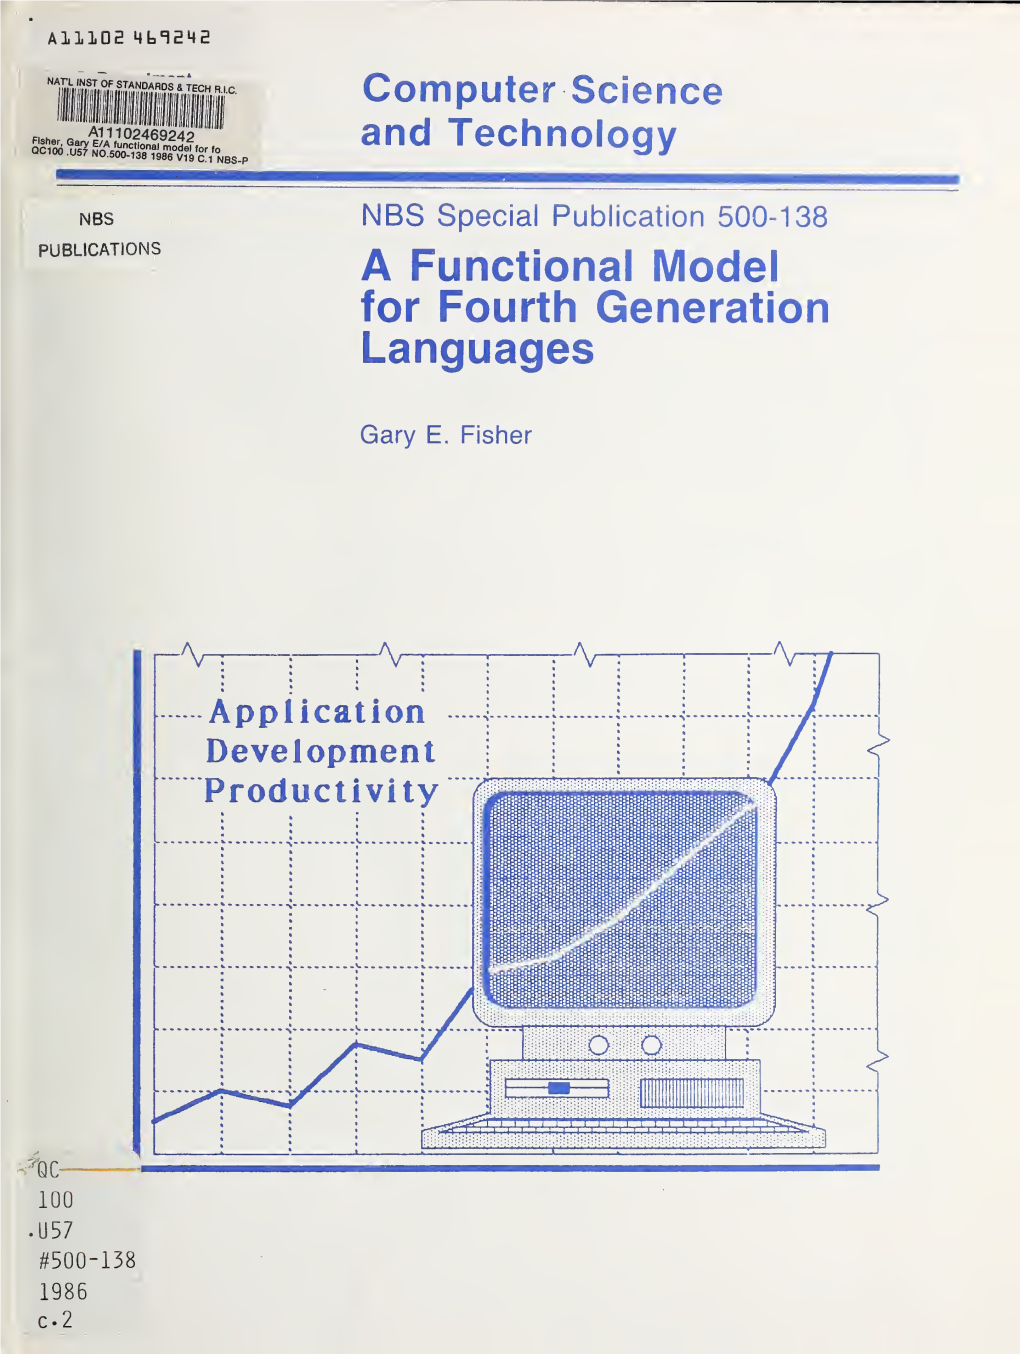 A Functional Model for Fourth Generation Languages